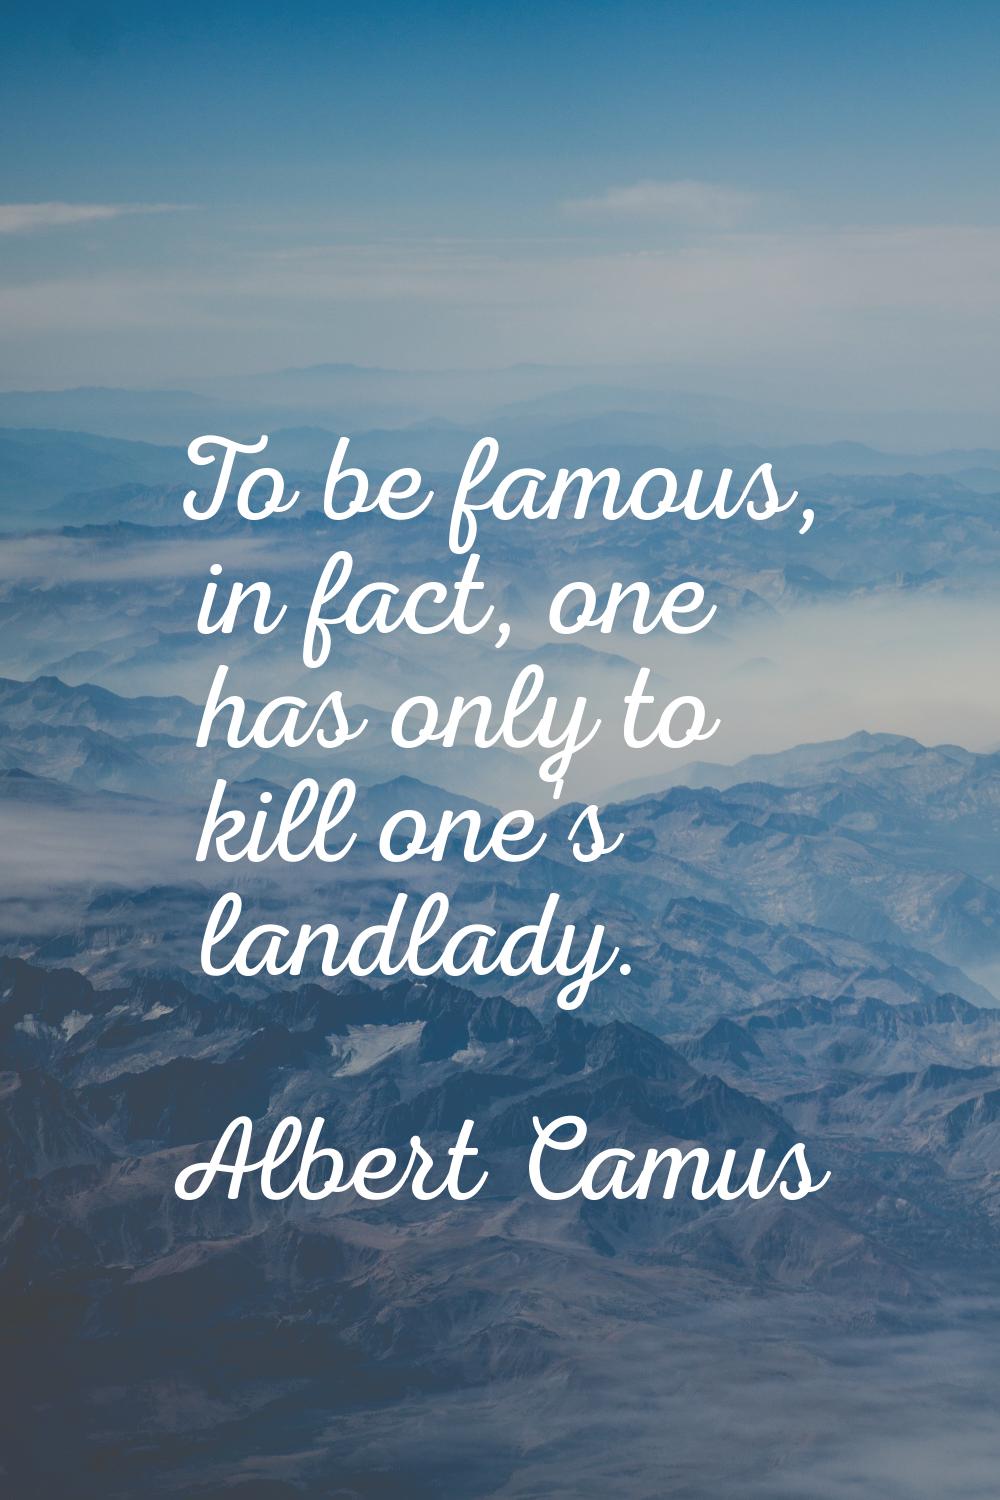 To be famous, in fact, one has only to kill one's landlady.